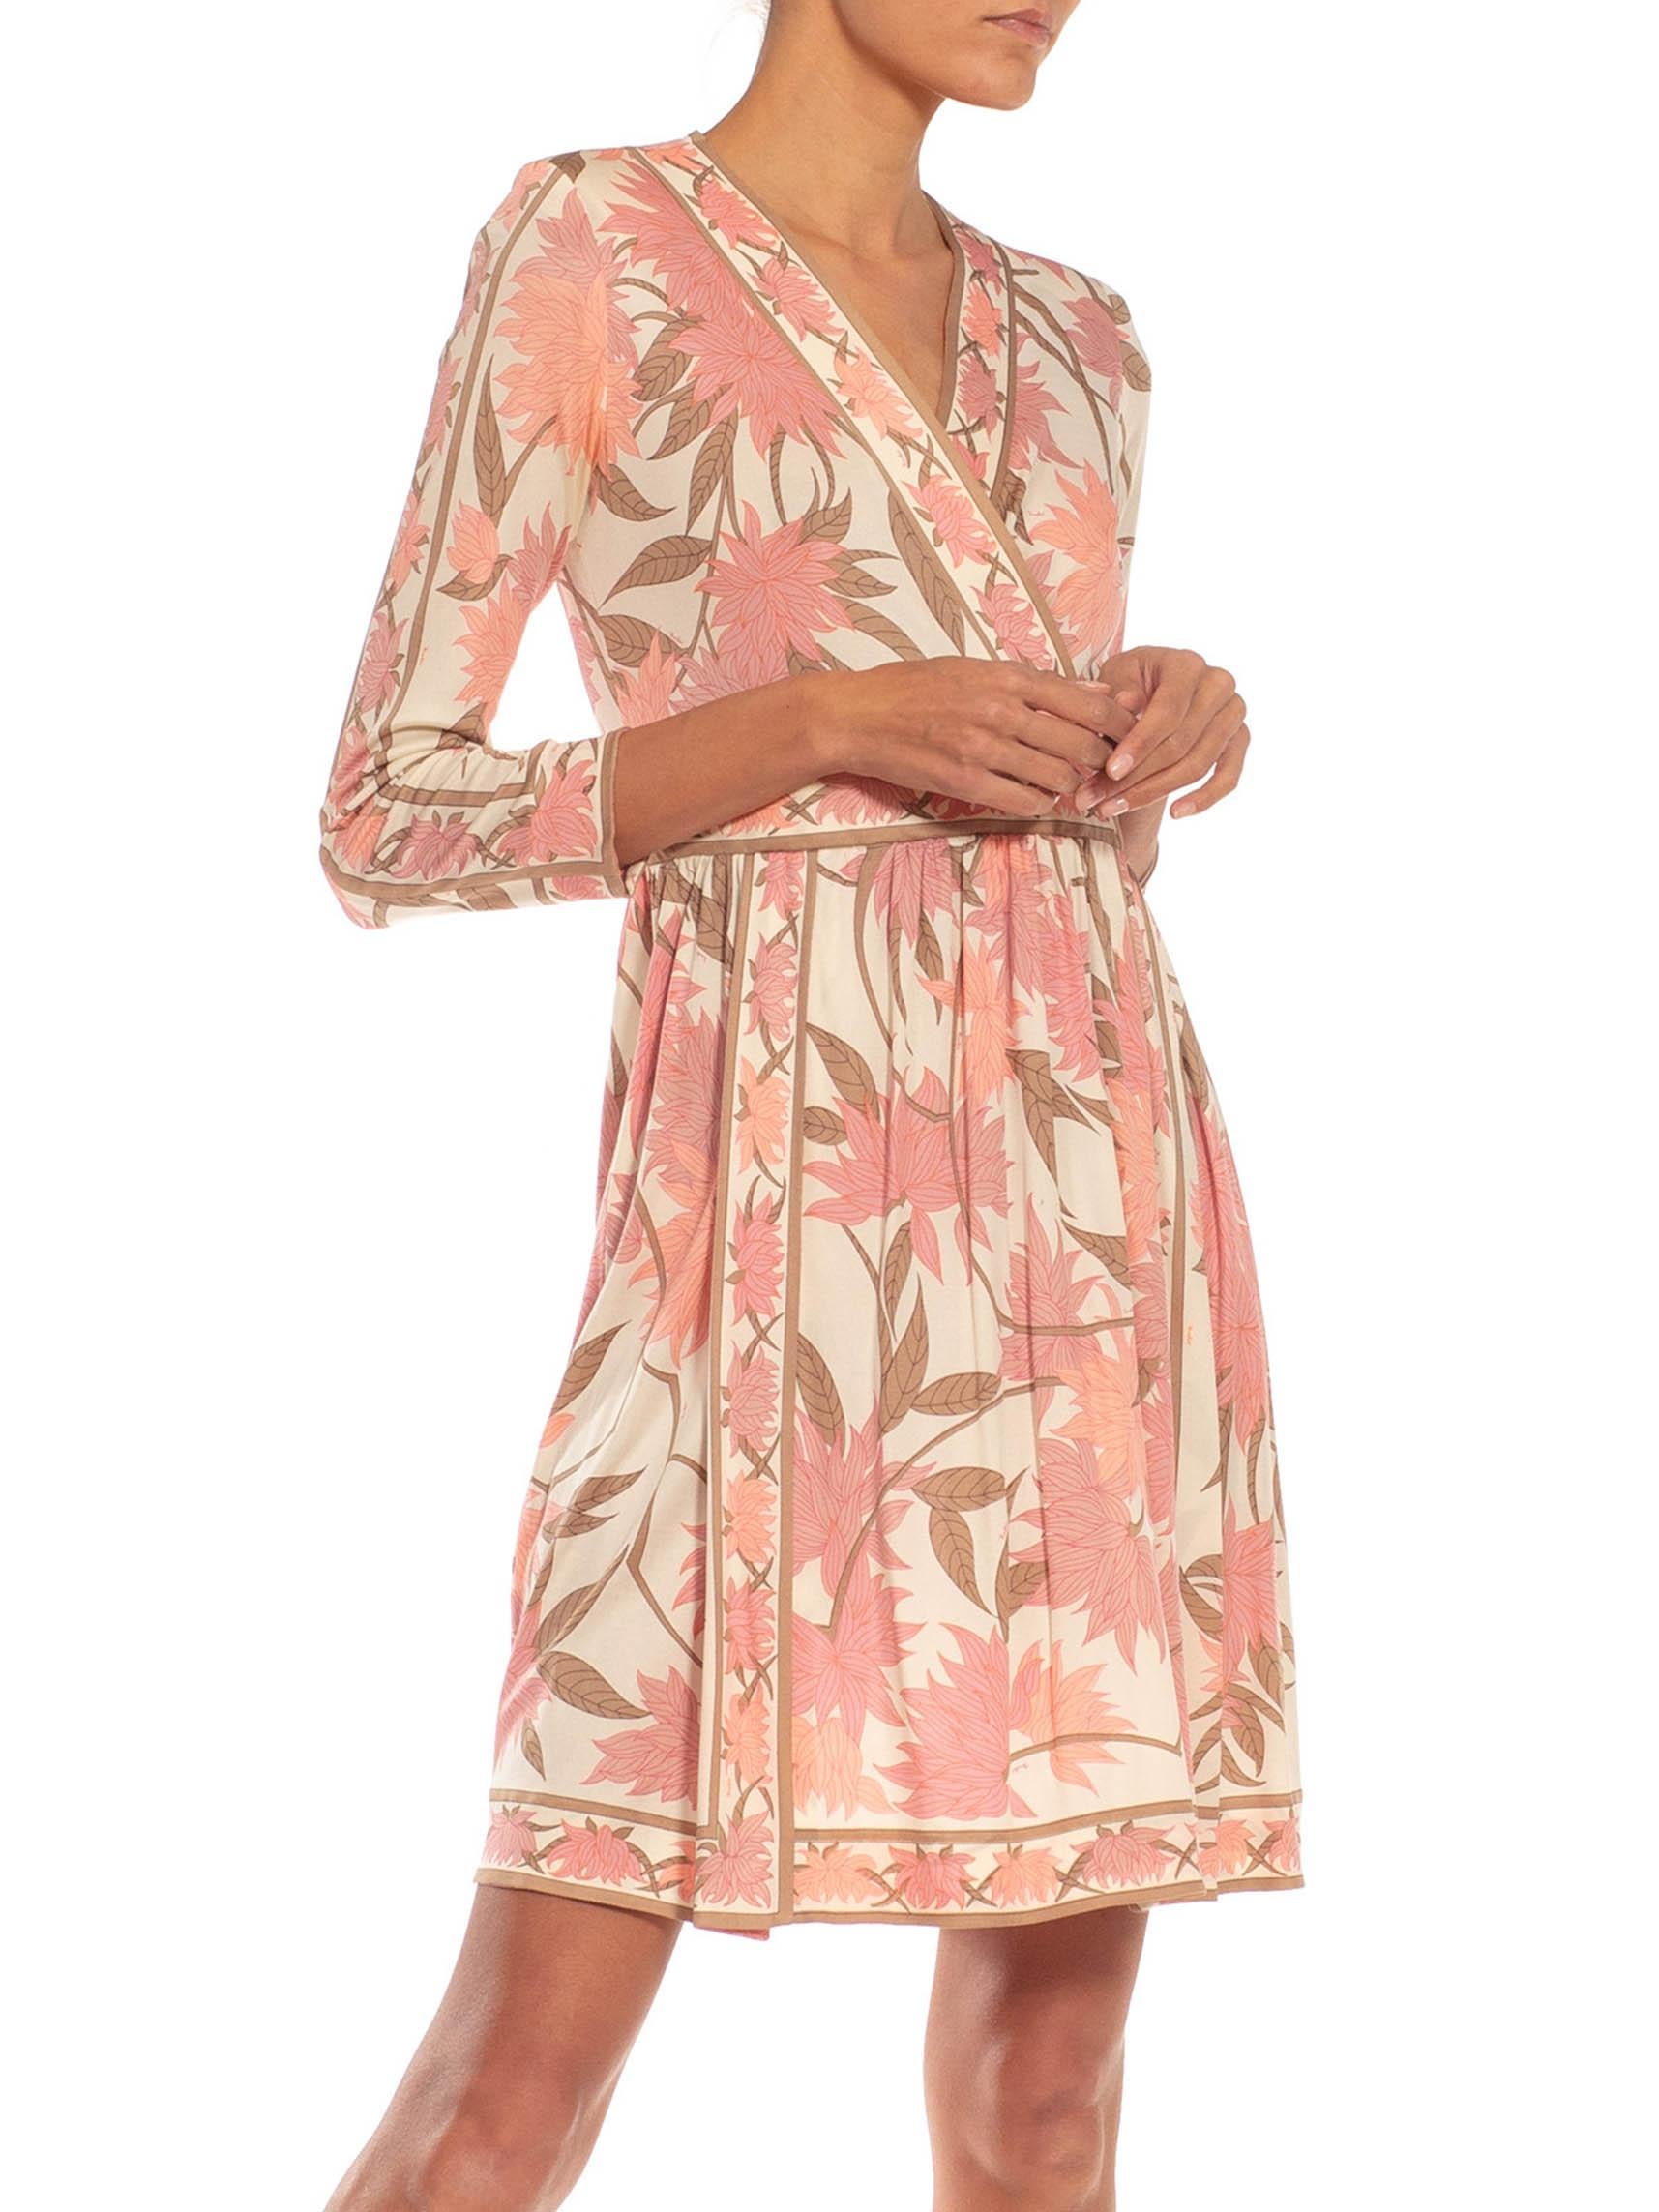 1970S EMILIO PUCCI Cream, Brown & Pink Floral Silk Rayon Blend Signed Dress For Sale 4